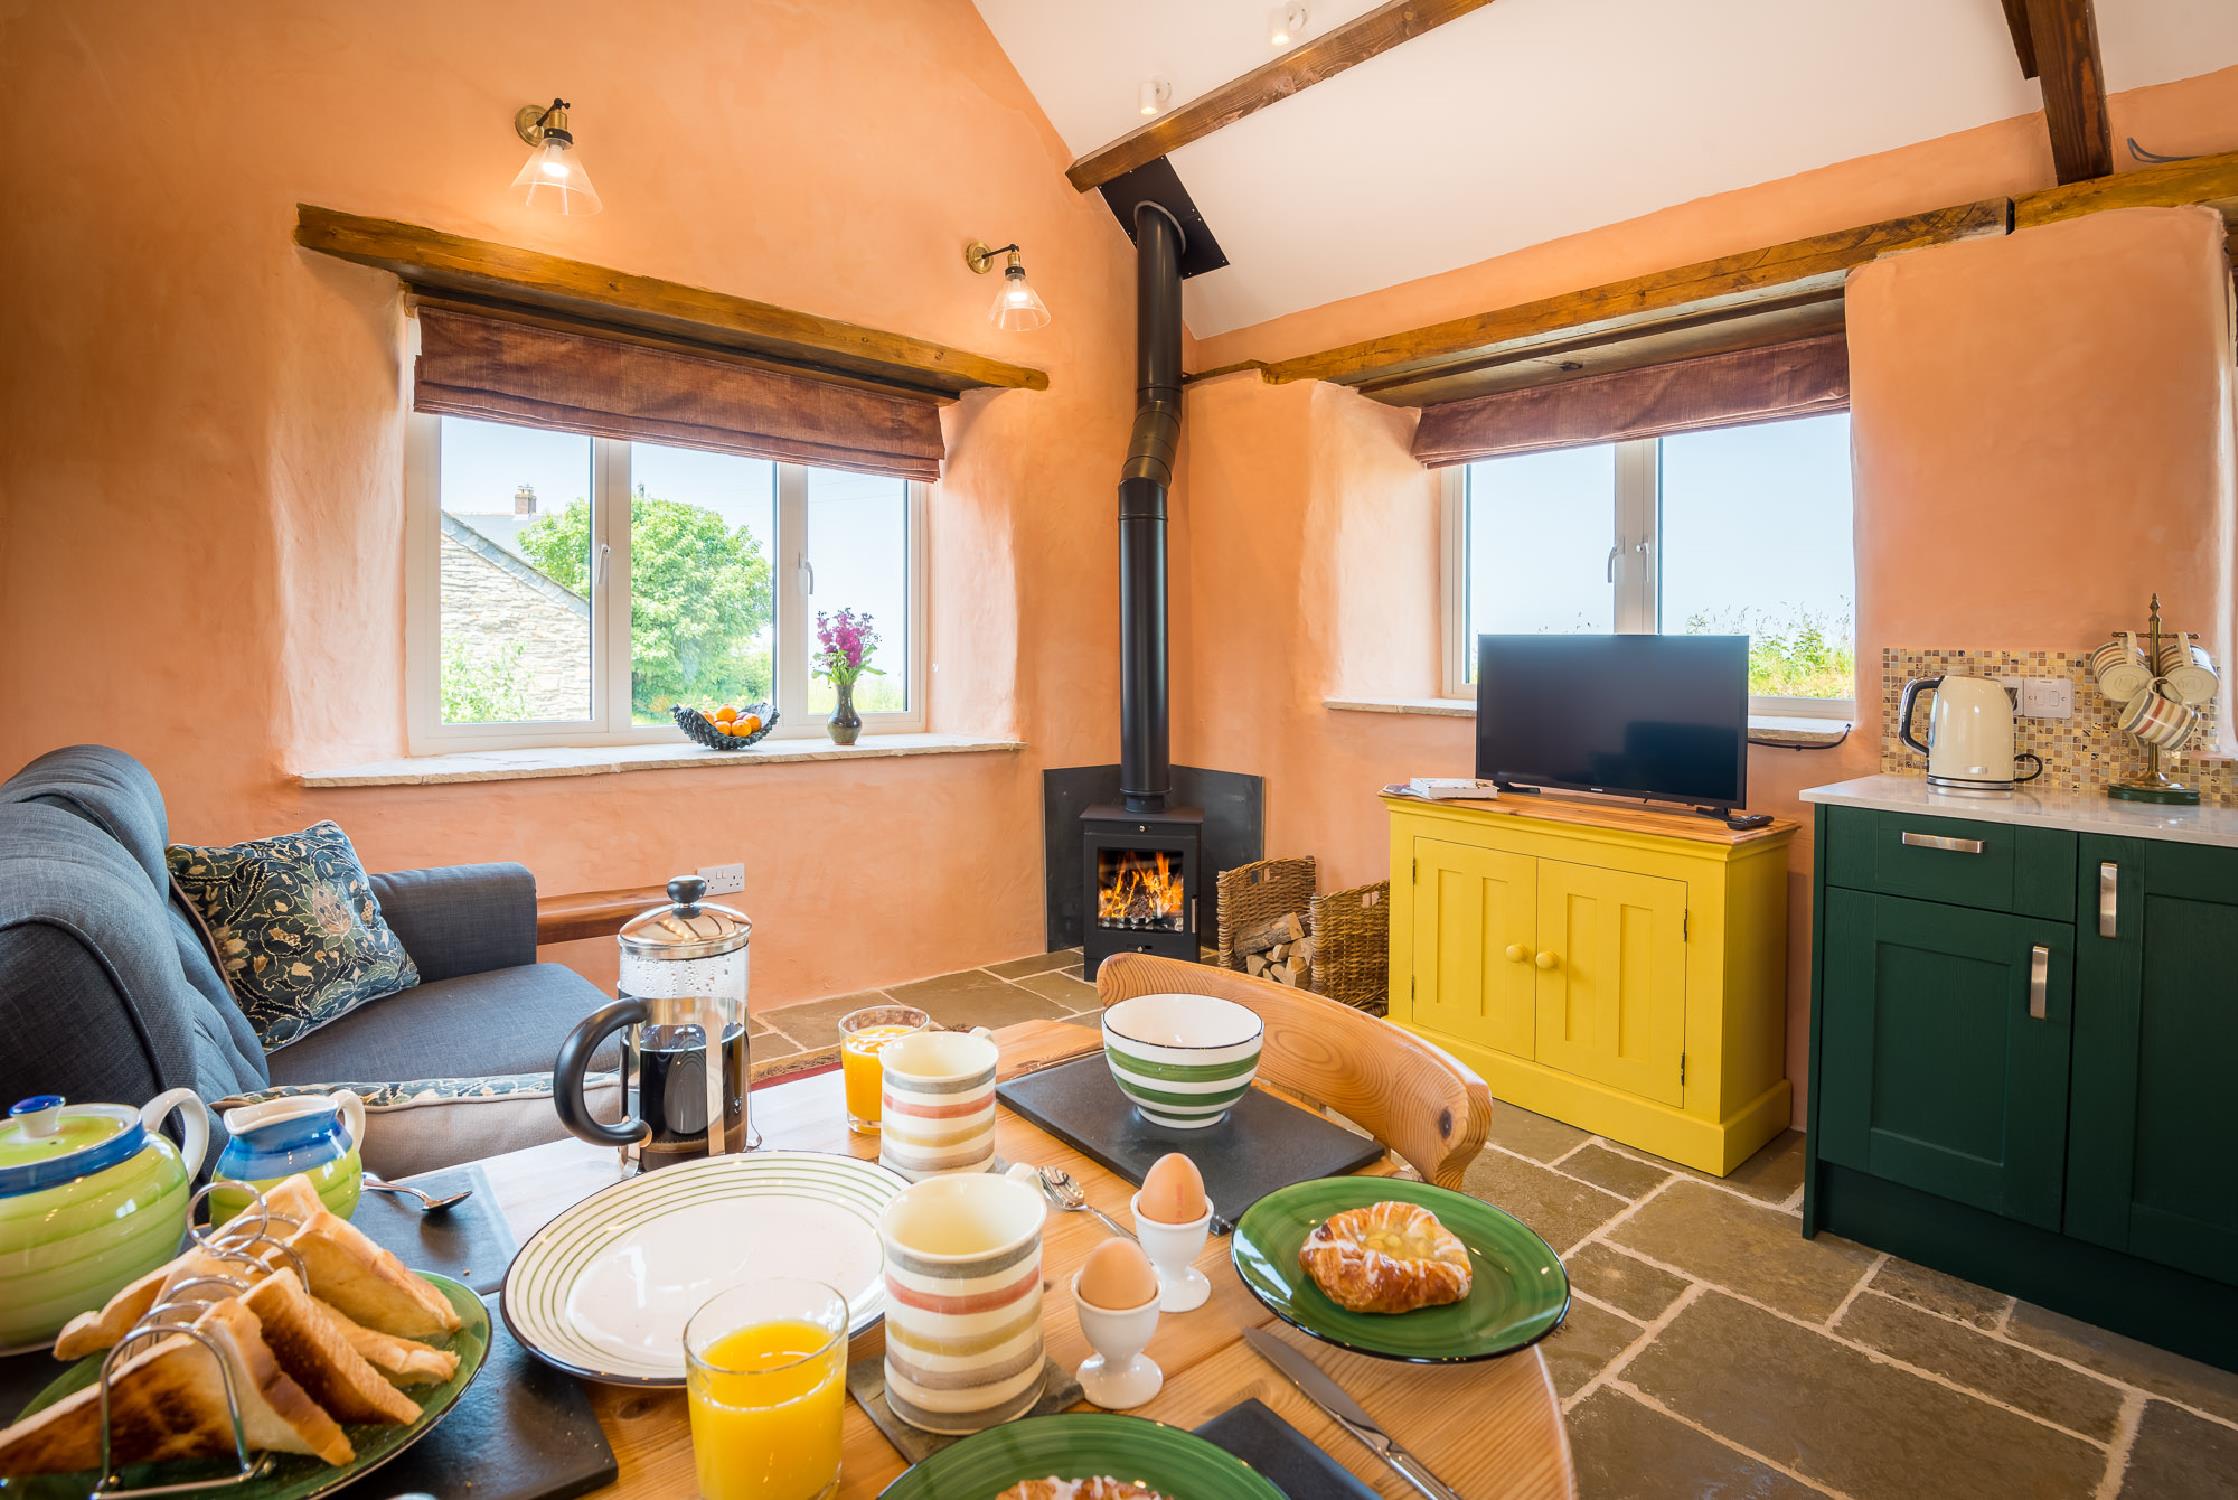 Log burner in sea view Blueberry Cottage Polrunny Farm holiday cottages Boscastle Cornwall